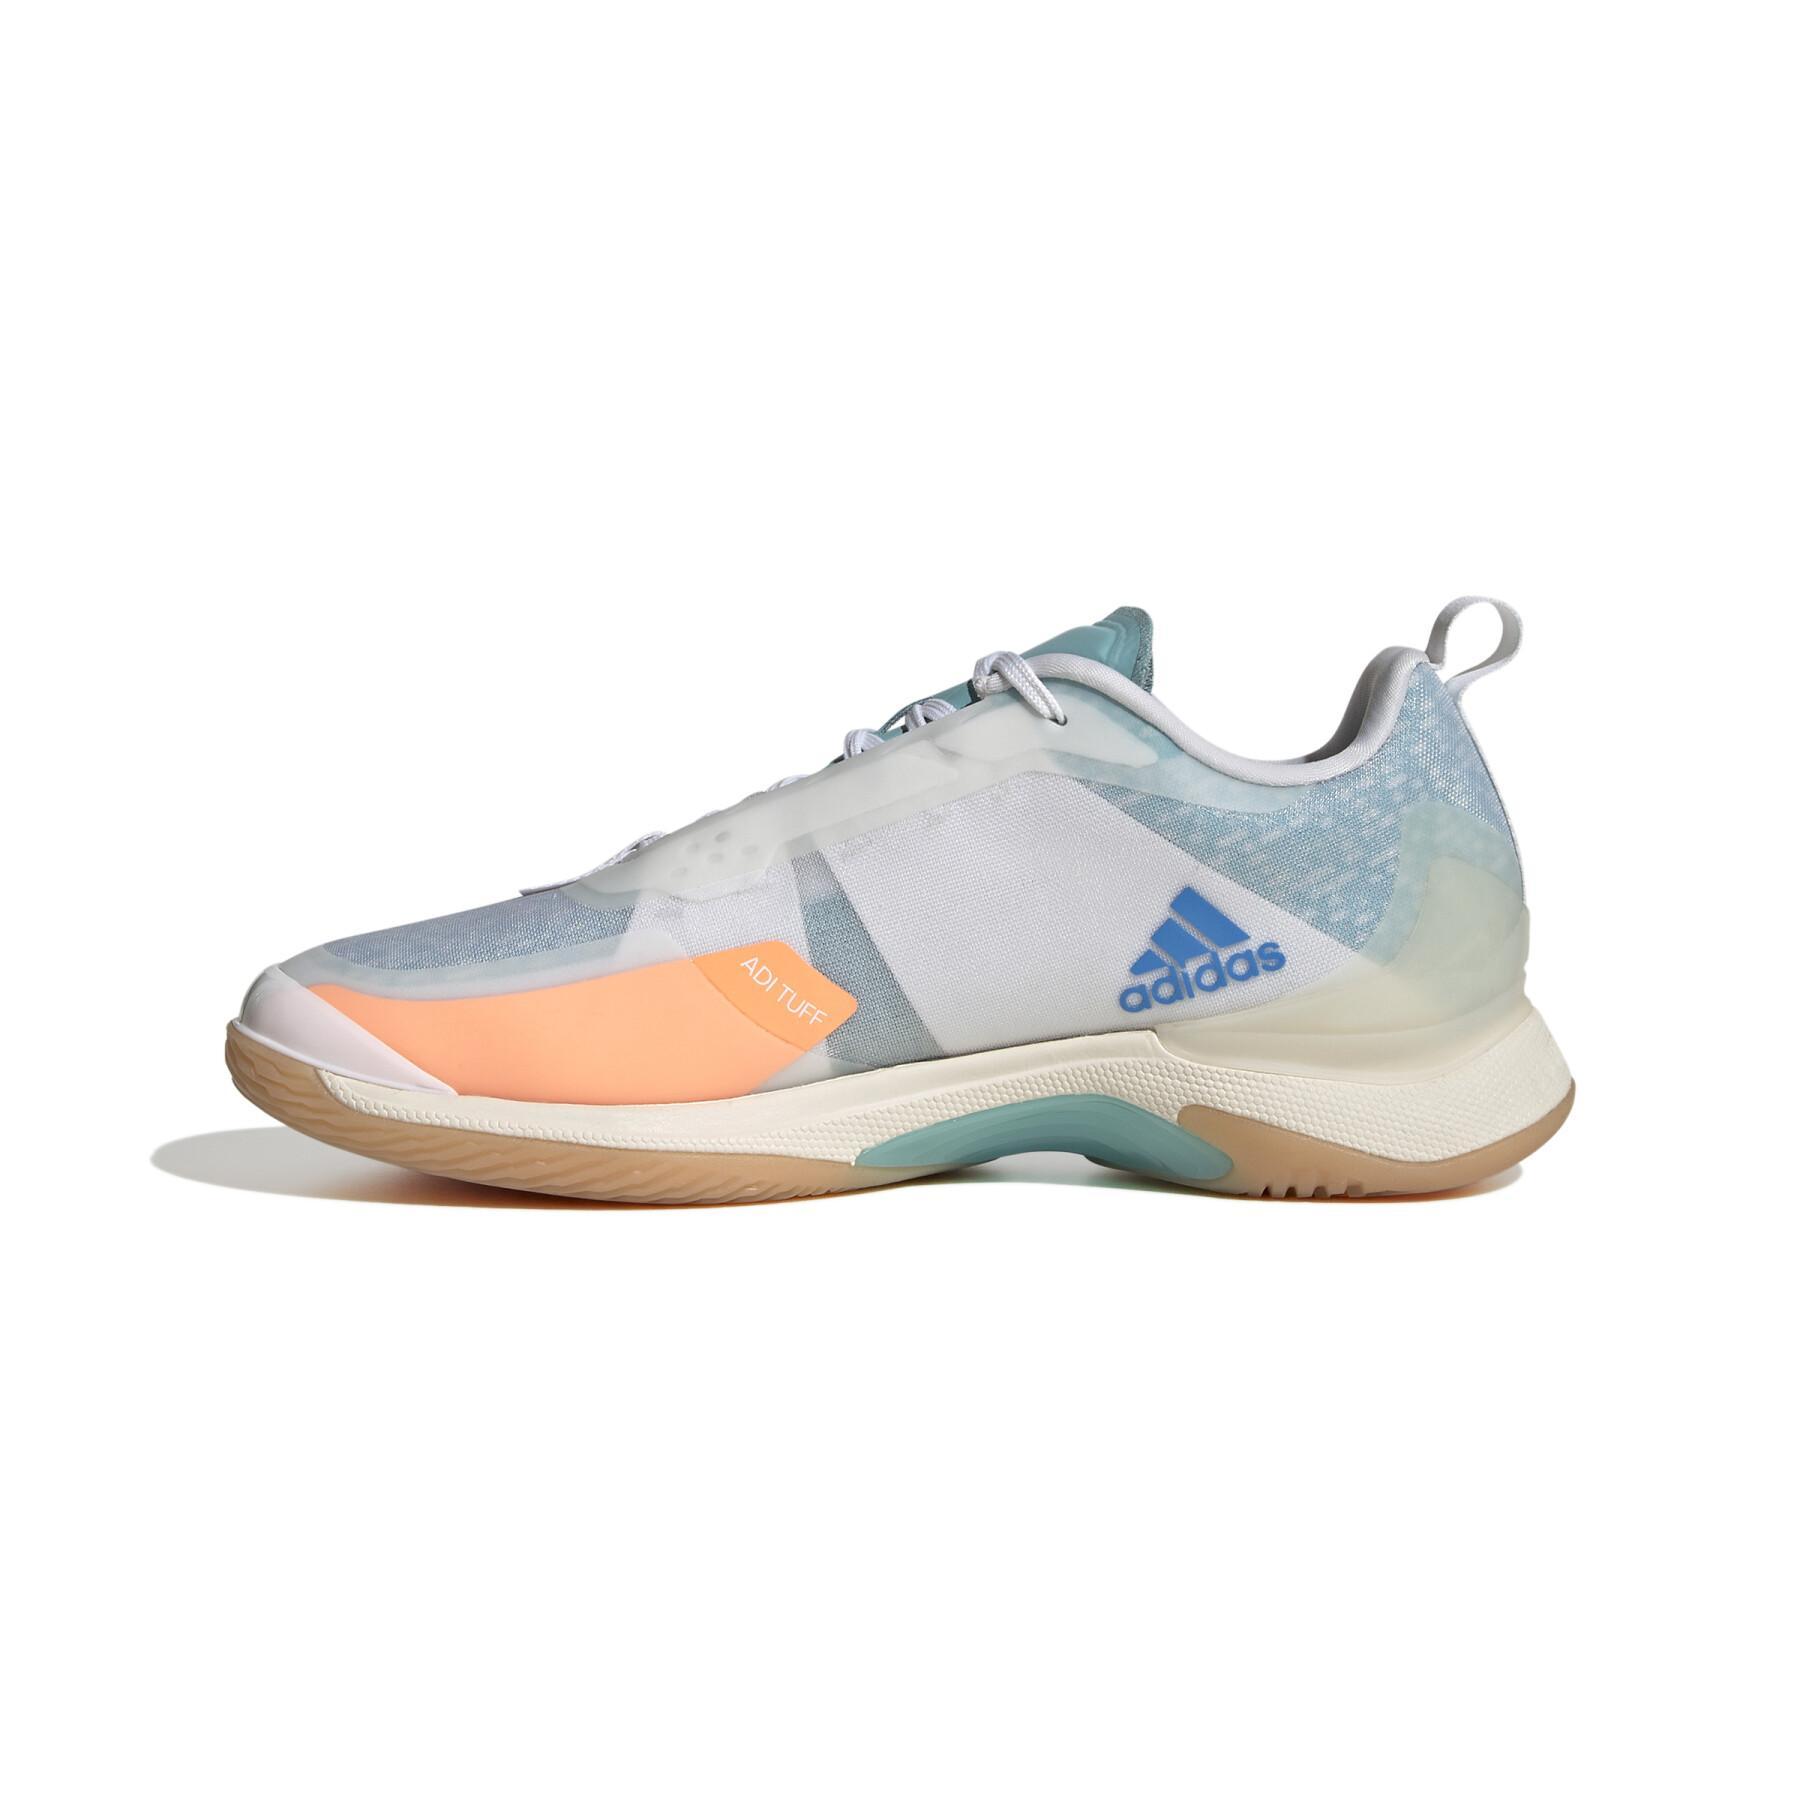 Women's tennis shoes adidas Avacourt Parley